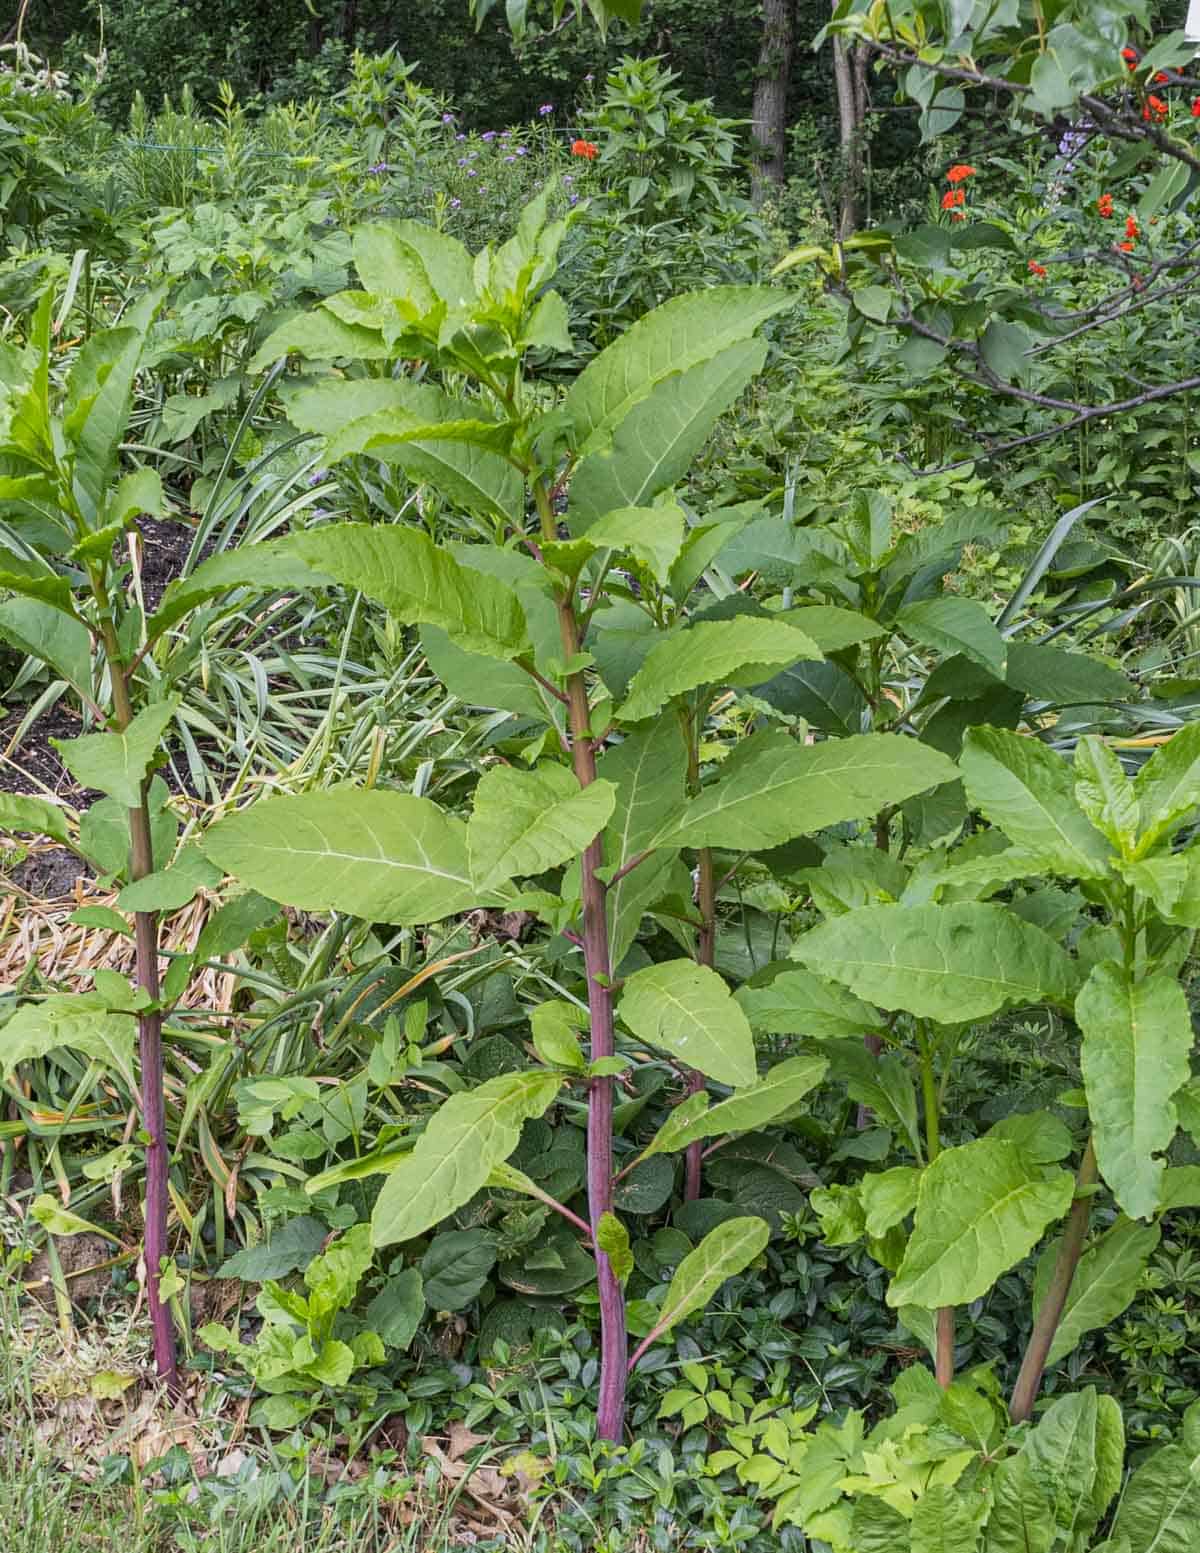 Mature pokeweed plants with red stems. 